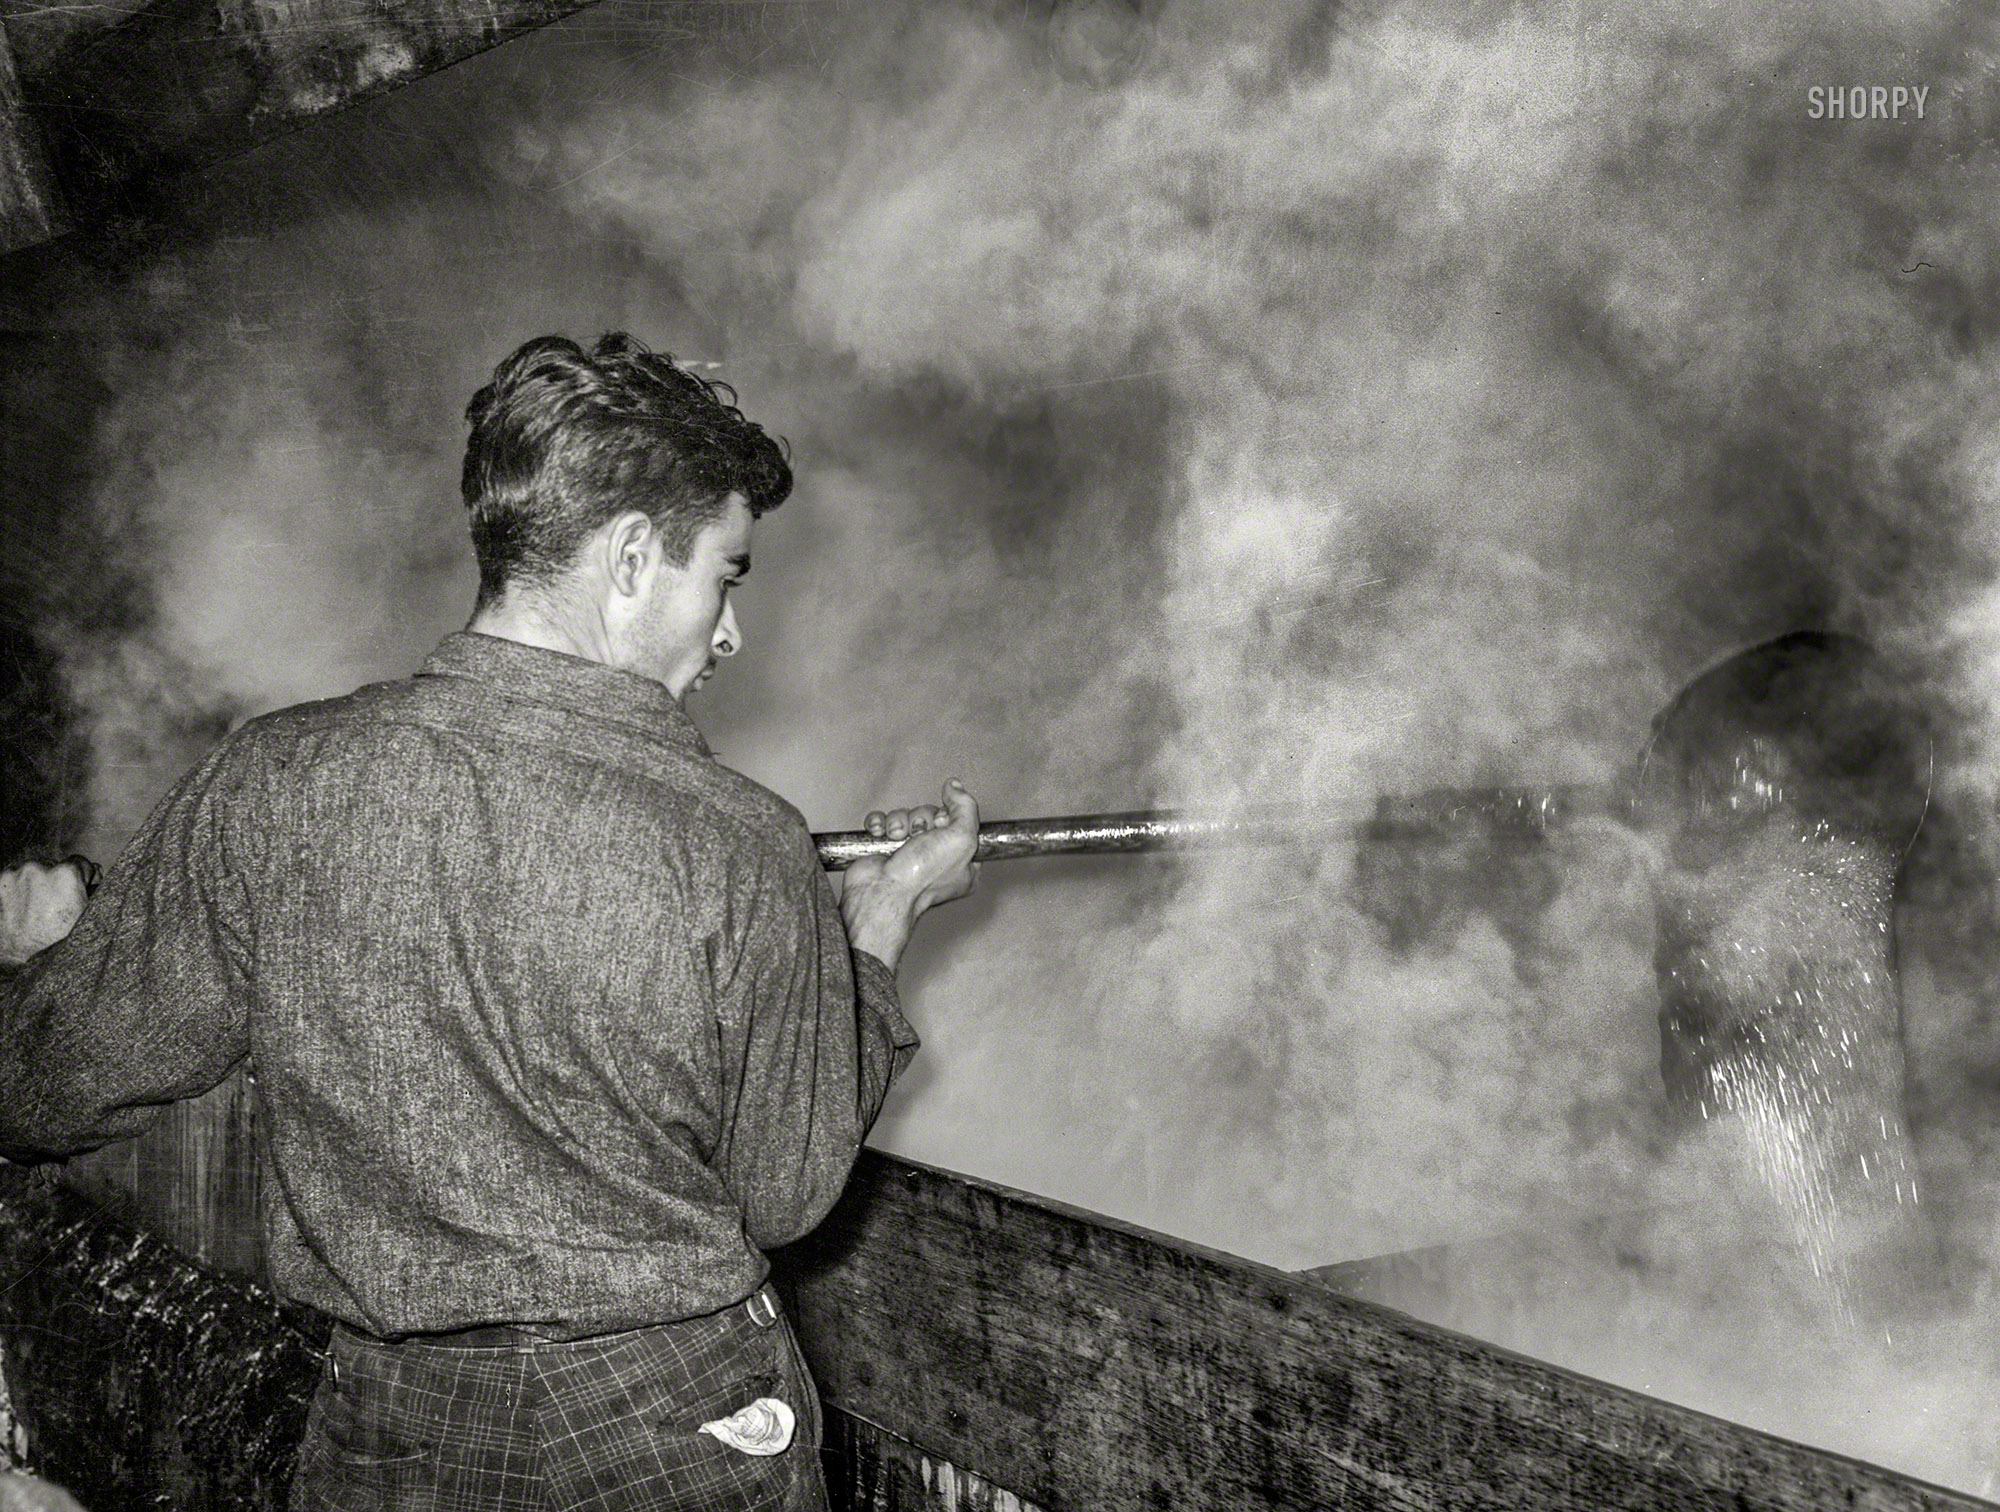 October 1938. "Ladling cane syrup from boiling vat to concentration vat at a sugar mill near New Iberia, Louisiana." Medium format acetate negative by Russell Lee for the Farm Security Administration. View full size.